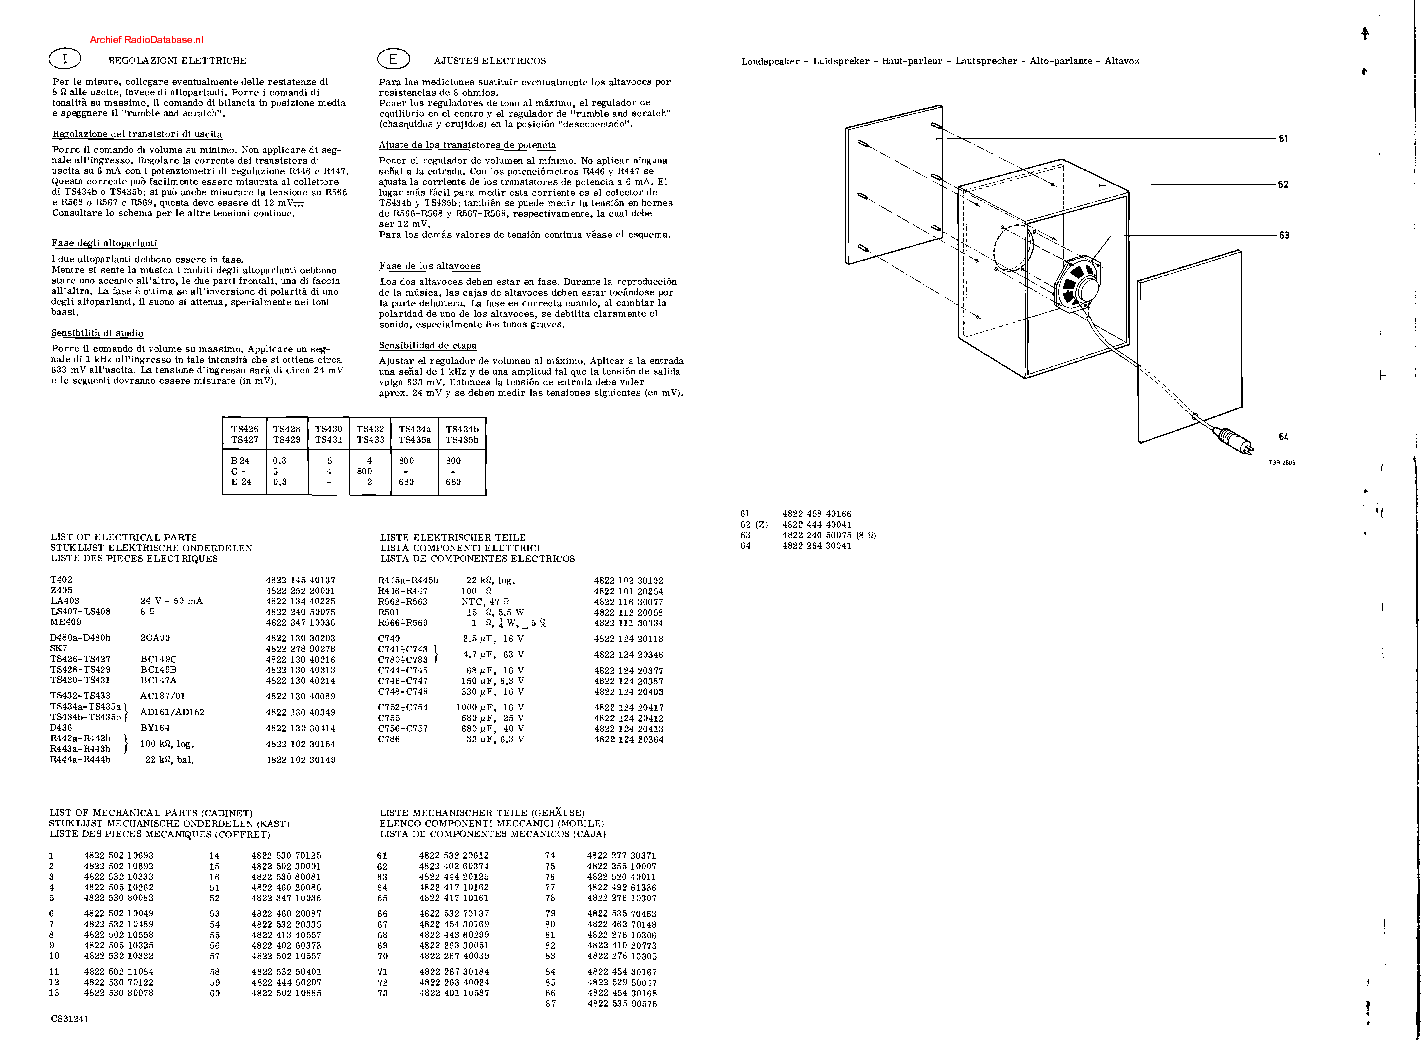 PHILIPS 22GF560 SM service manual (2nd page)